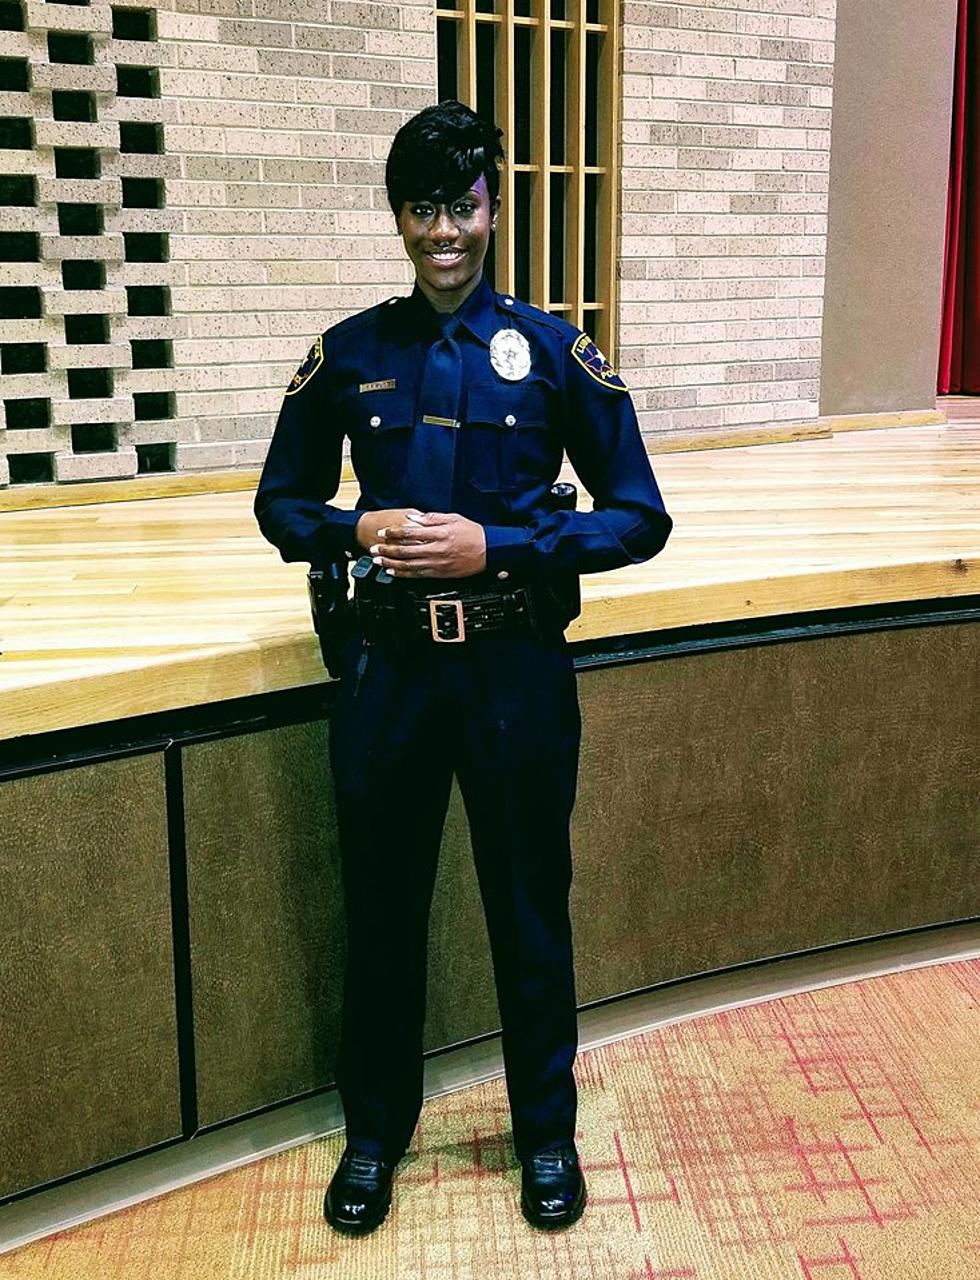 Meet Officer King, the First African American Female Police Officer in Lubbock for 2017